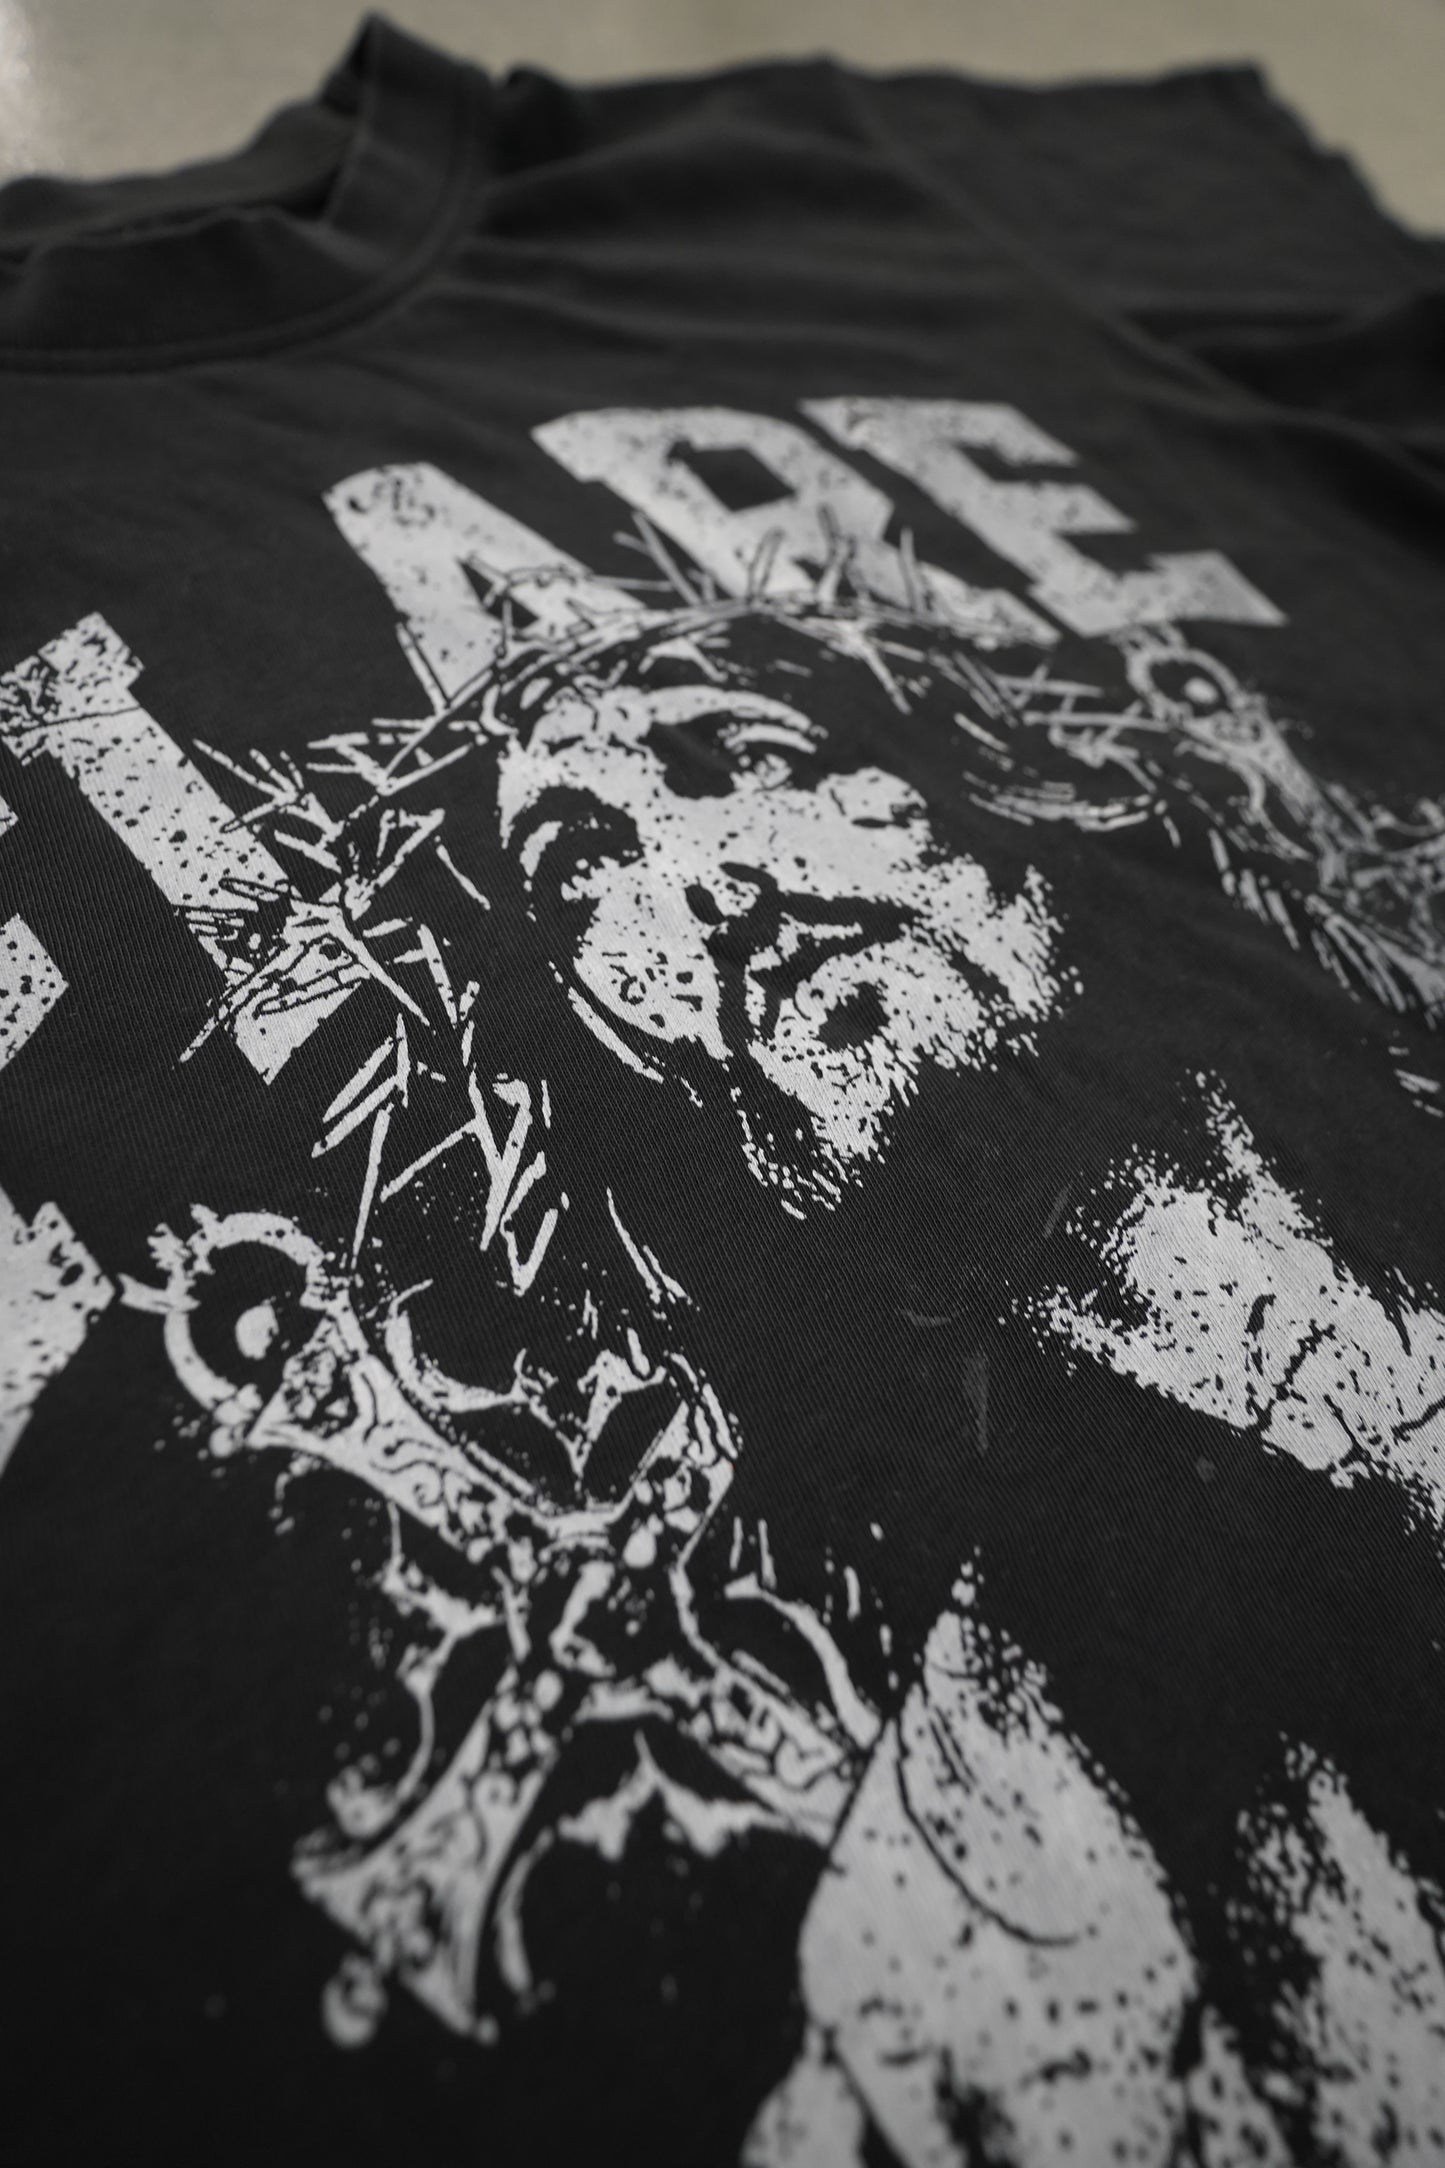 Christ is the way Graphic tee